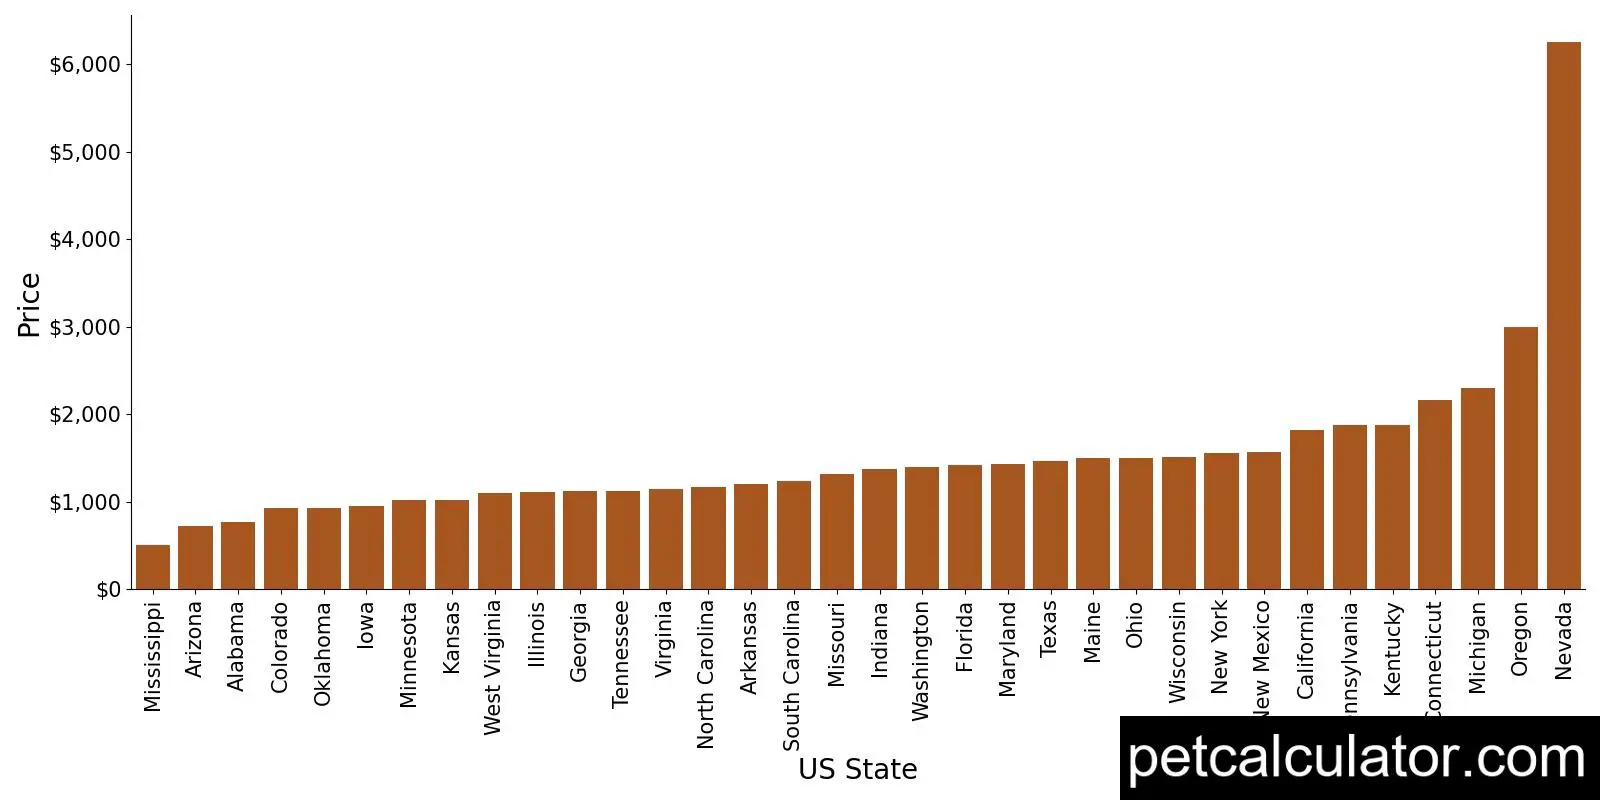 Price of American Bulldog by US State 